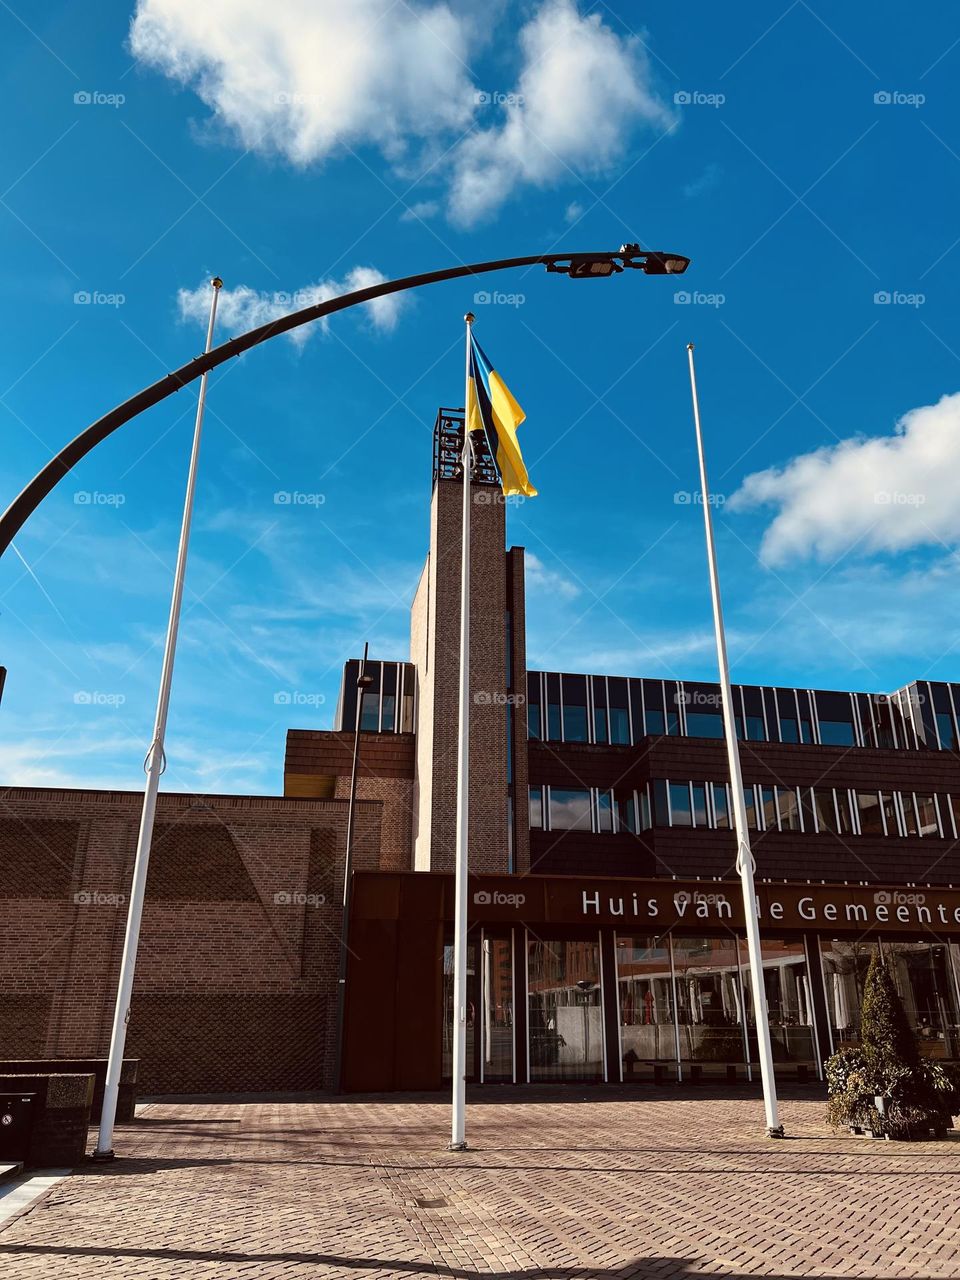 Ukrainian flag in Dutch city to show support